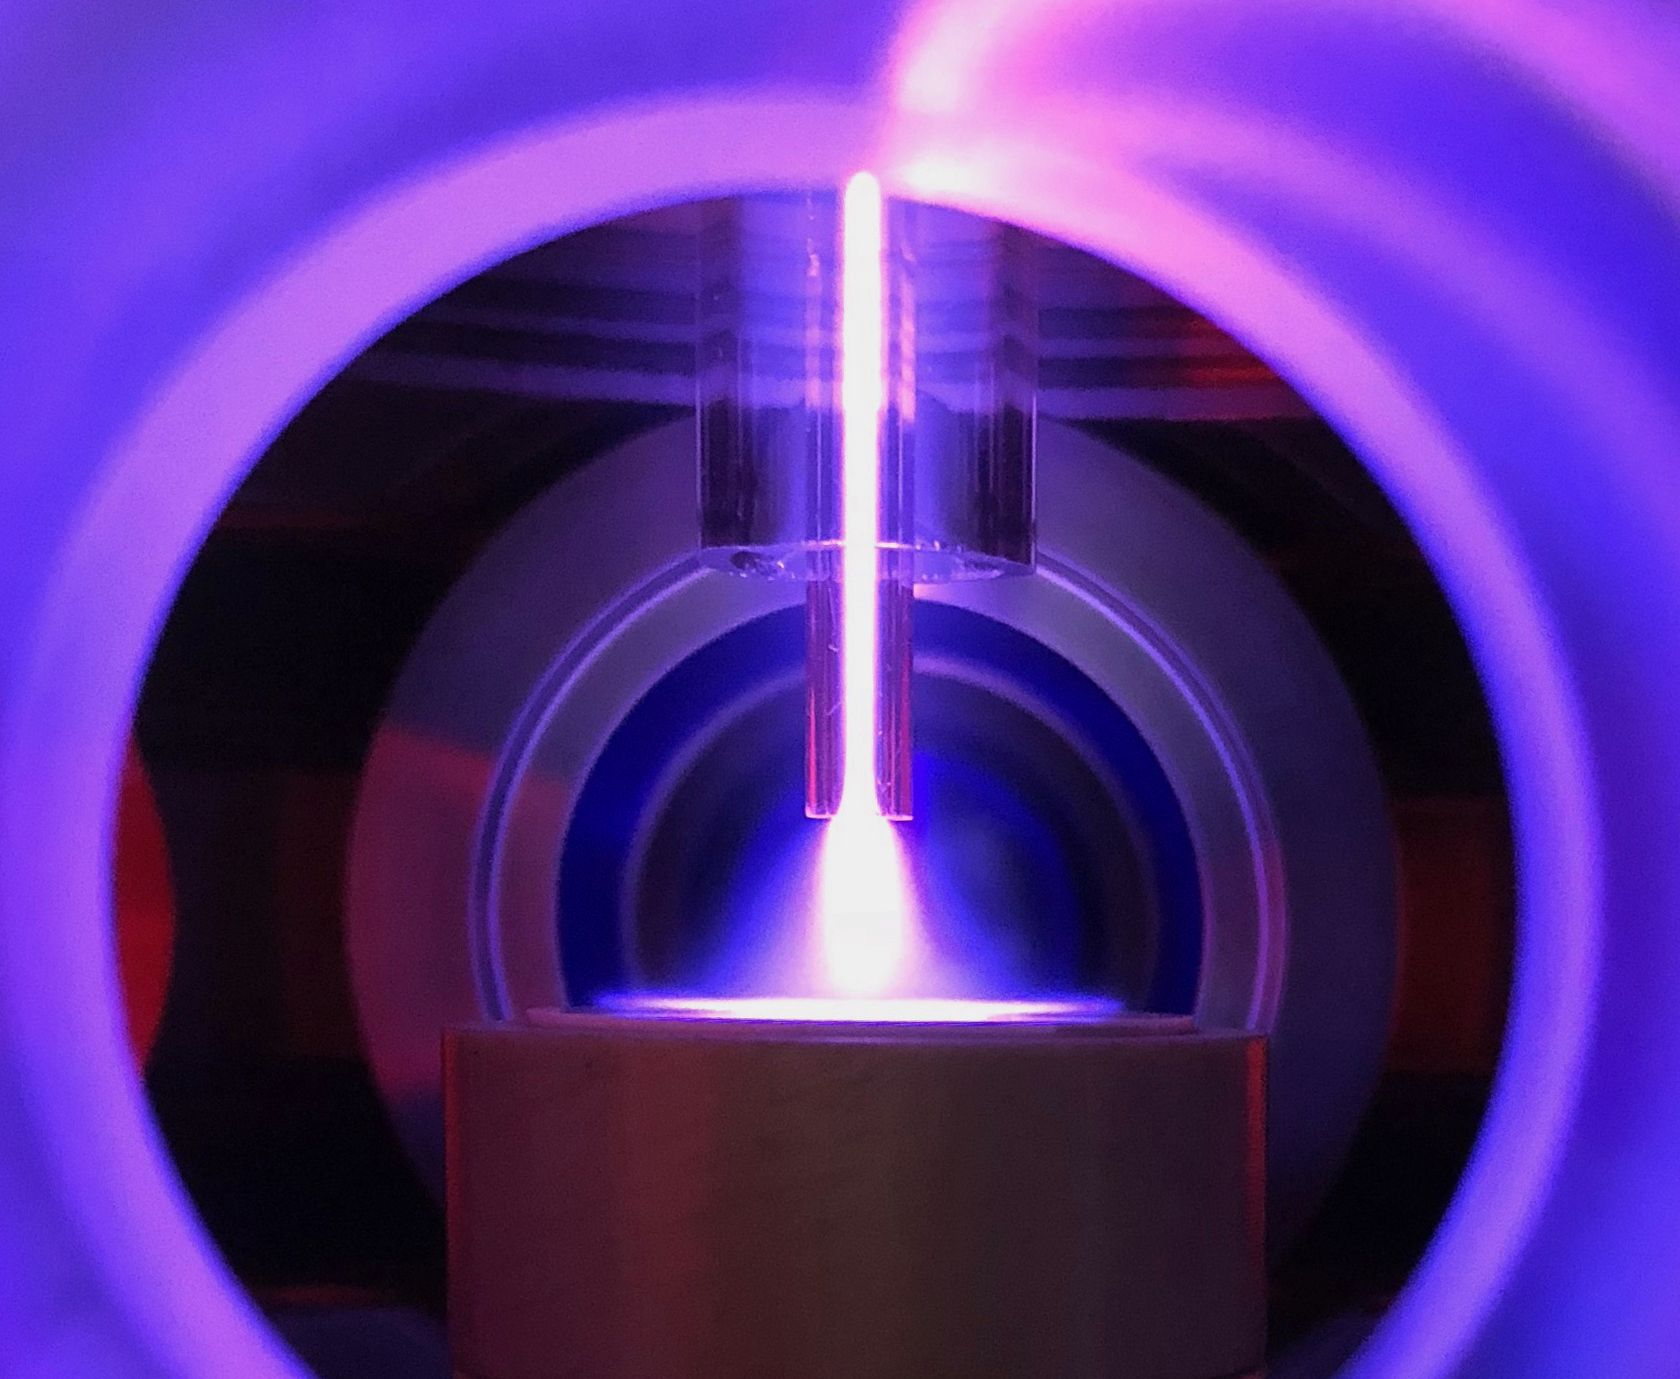 Atmospheric Jet laser displaying colors of purple within a metal cylinder